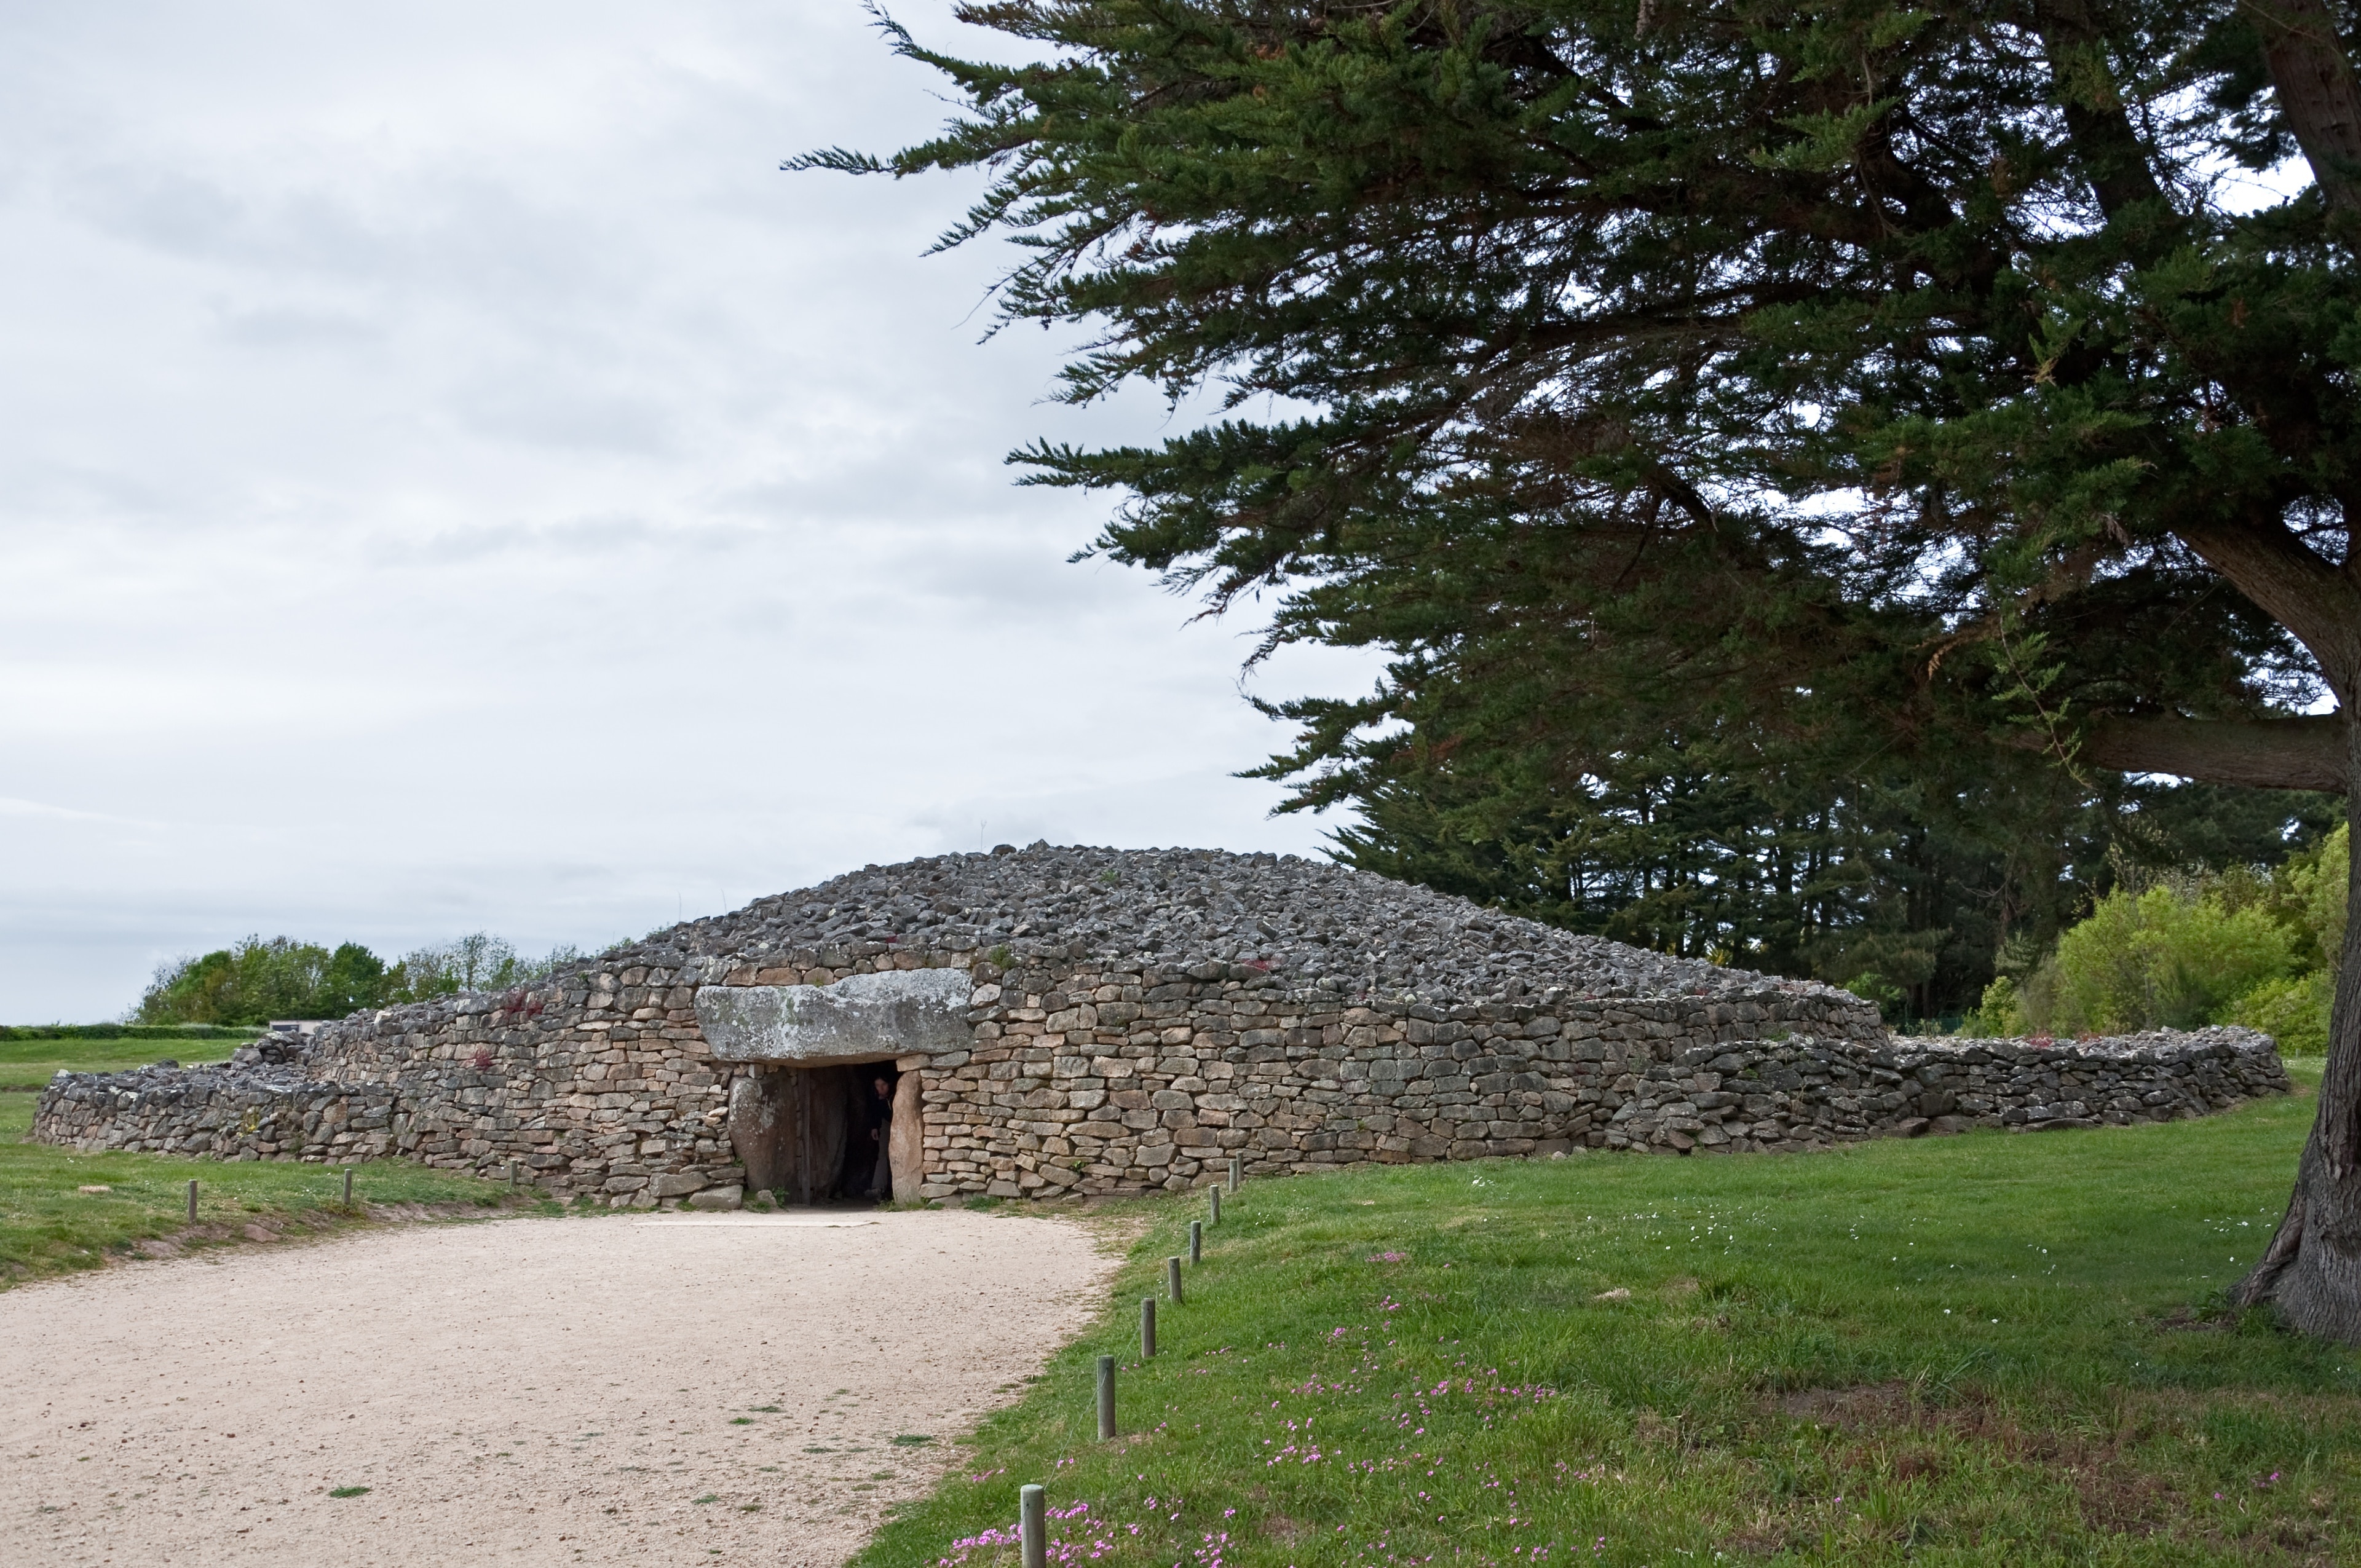 The restored cairn of the dolmen called 'La Table des Marchand' in Locmariaquer (Morbihan, Brittany, France)